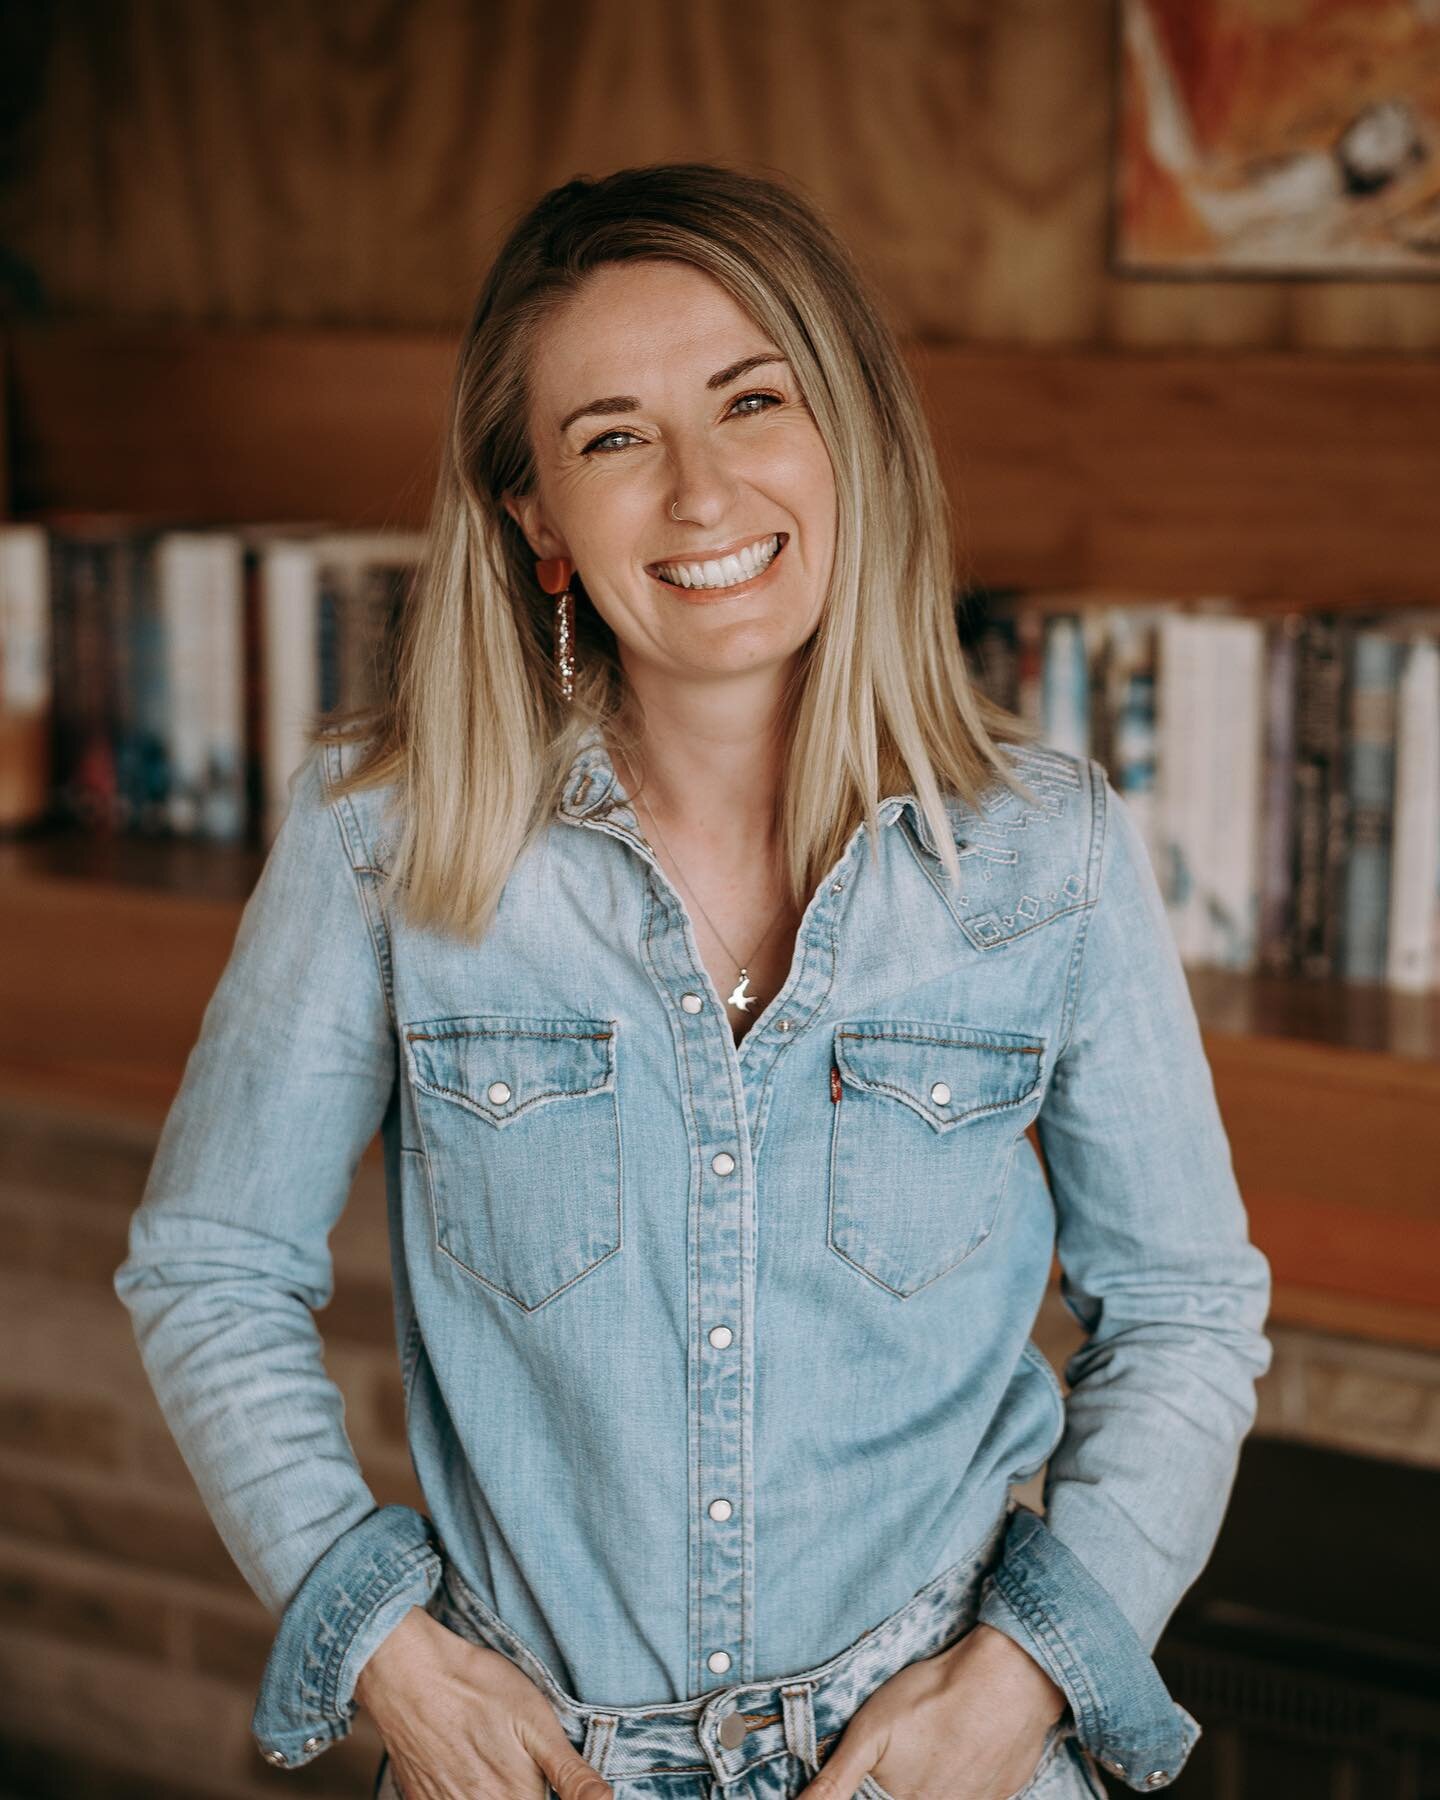 Super happy to end 2023 with talented author @clairevanryn joining Zeitgeist Agency. Her debut novel, &lsquo;The Secrets of the Huon Wren&rsquo; @penguinbooksaus @penguinaudioaus has captivated readers across the country. Welcome to @zeitgeistwriters